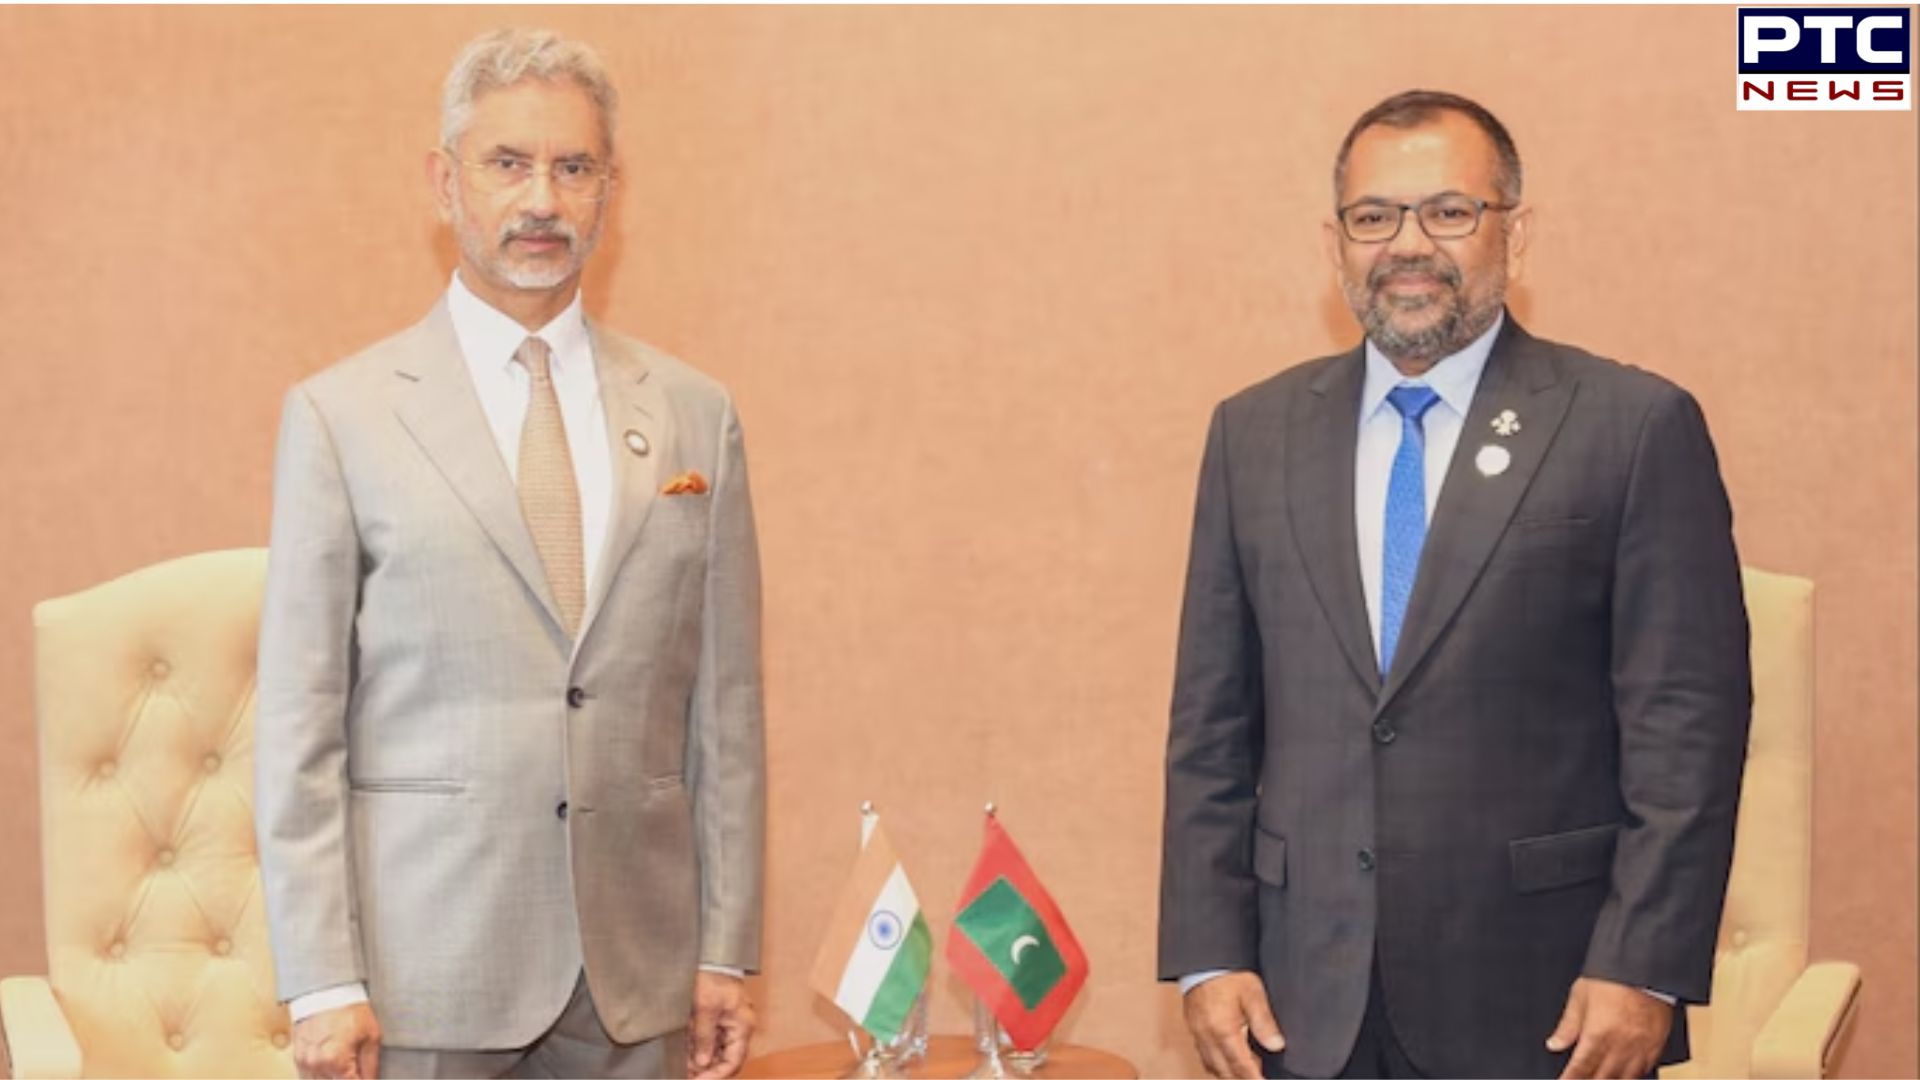 'Thank you India': Maldives on allowing export of essential goods; Jaishankar reacts